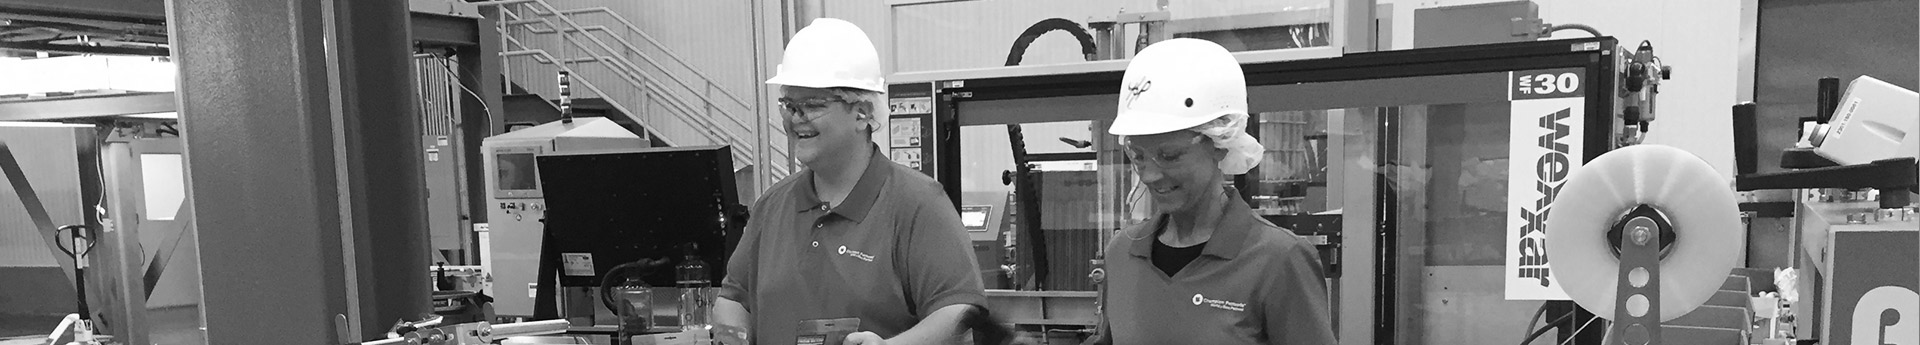 Walter and Kim on the packaging line, DogStar Kitchens